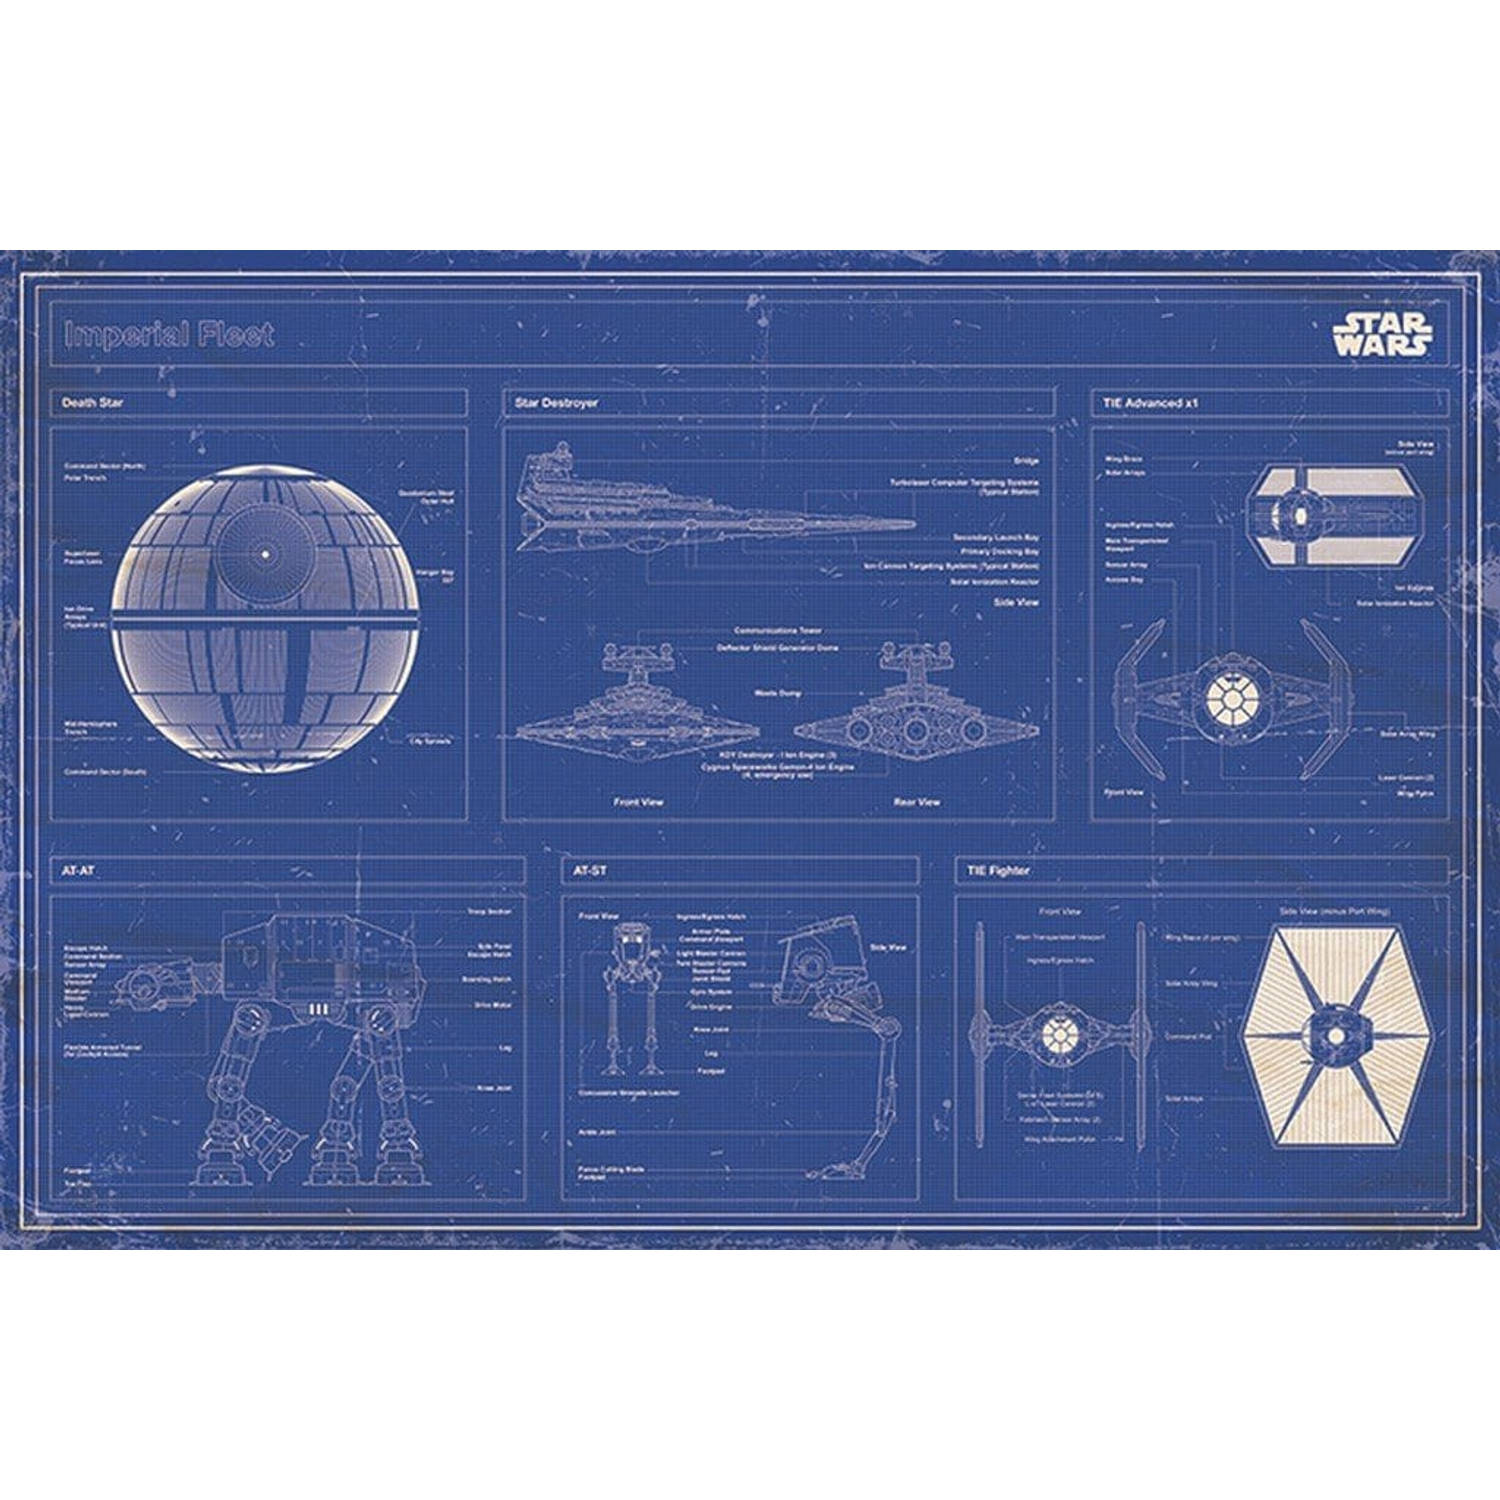 Star Wars Imperial Fleet Blueprint 24 x 36 Inches Maxi Poster